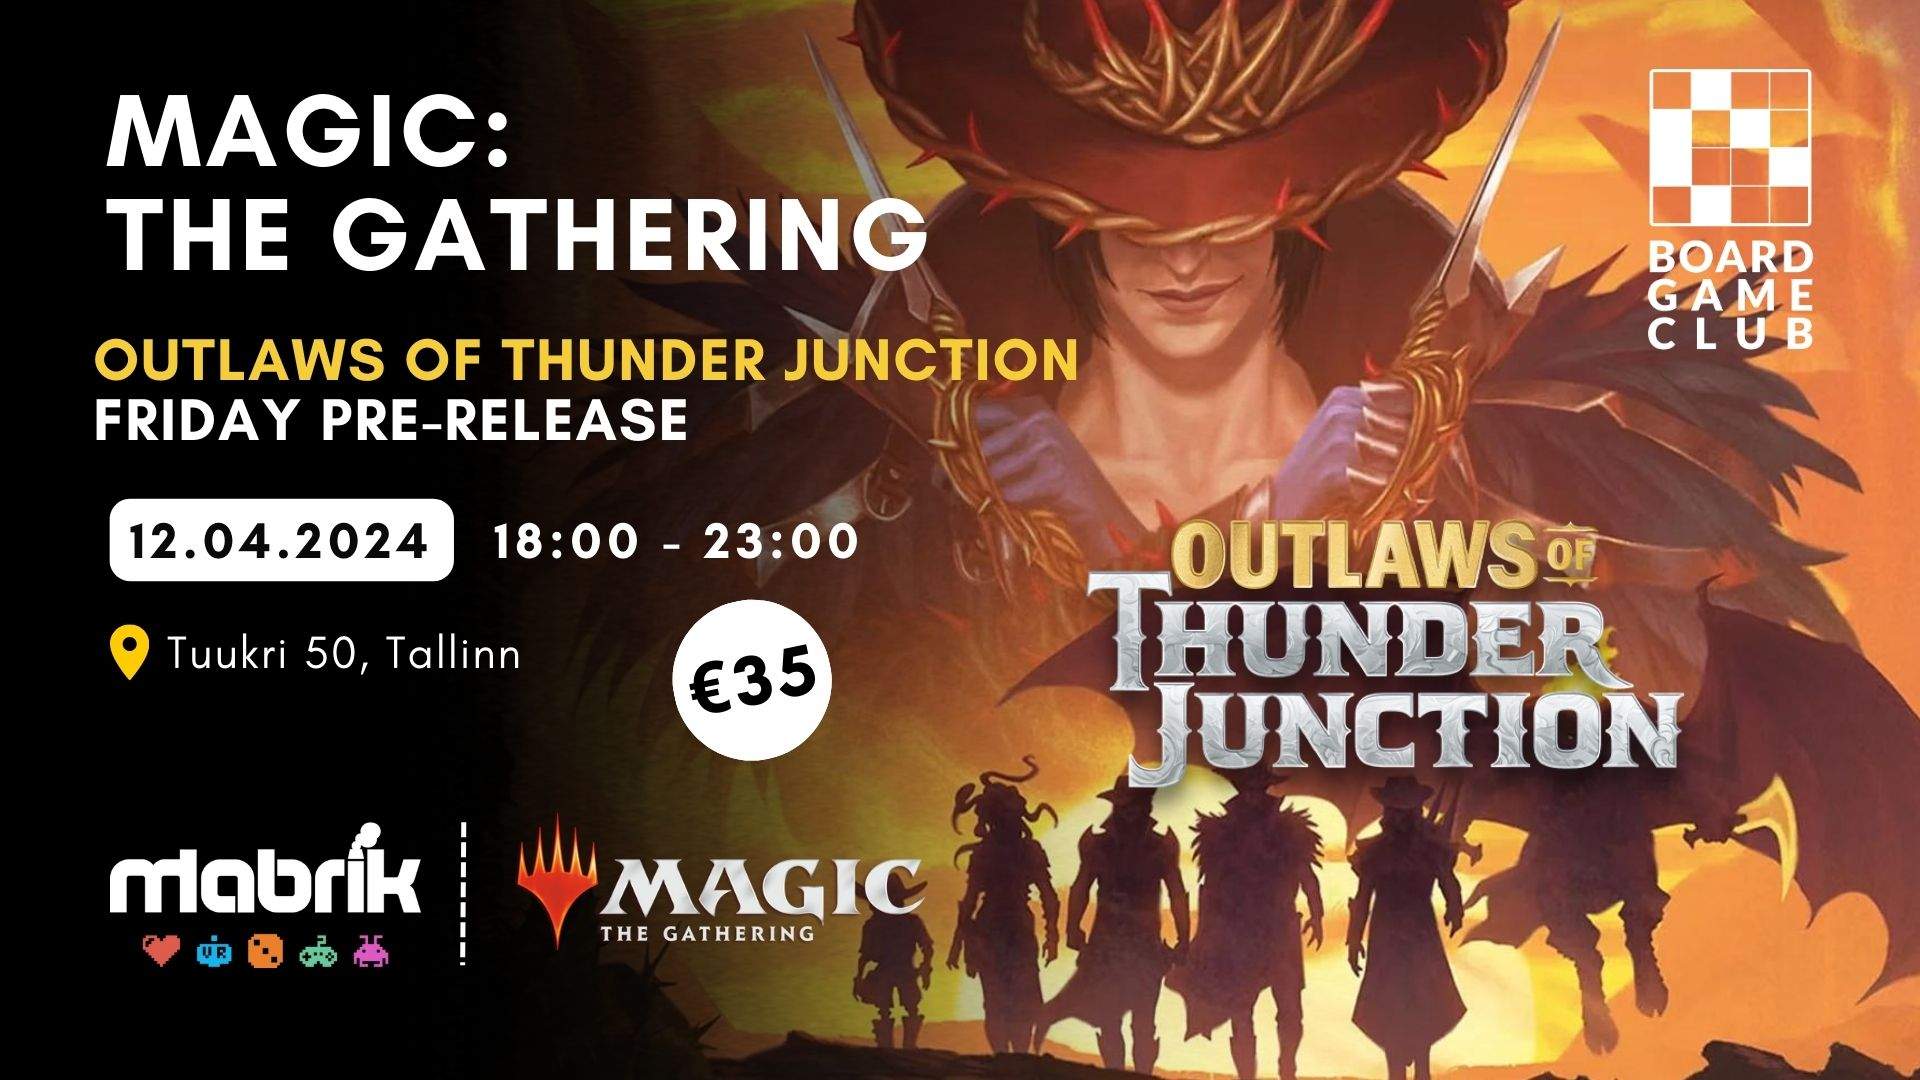 Events - 12.04.2024 - MTG: Outlaws of Thunder Junction Friday Pre-Release